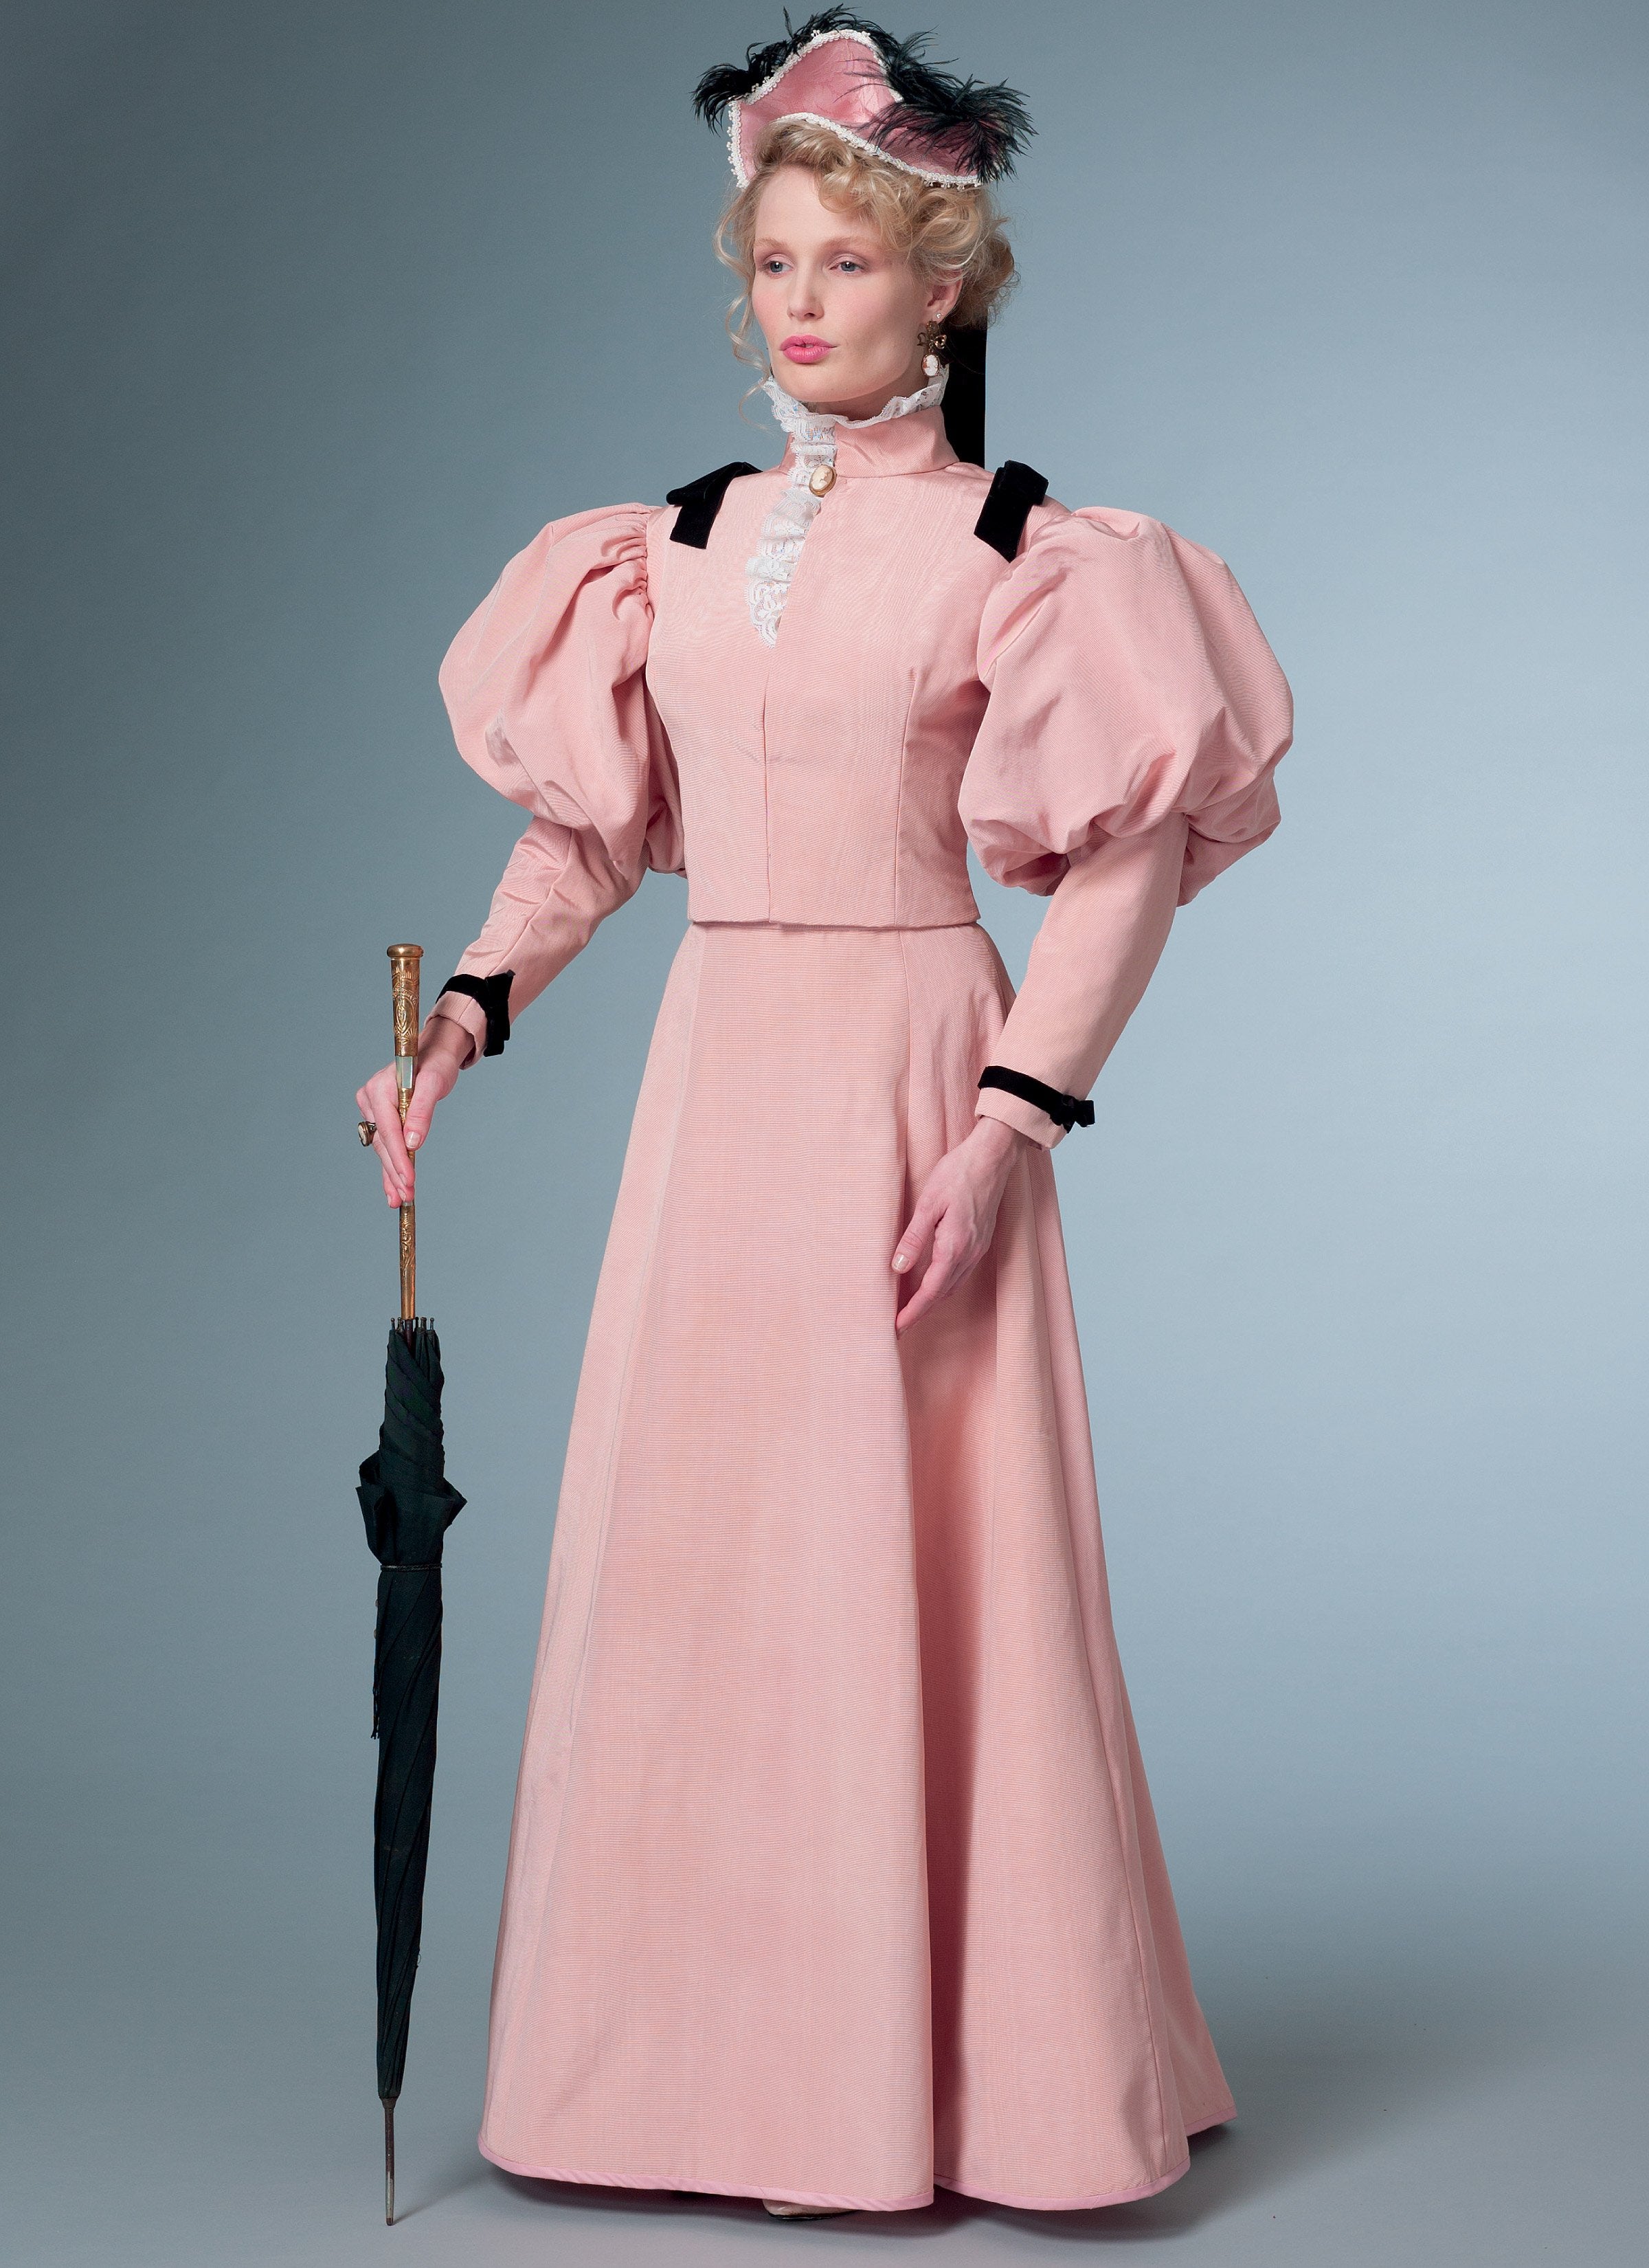 B6537 Misses' Edwardian Costume from Jaycotts Sewing Supplies